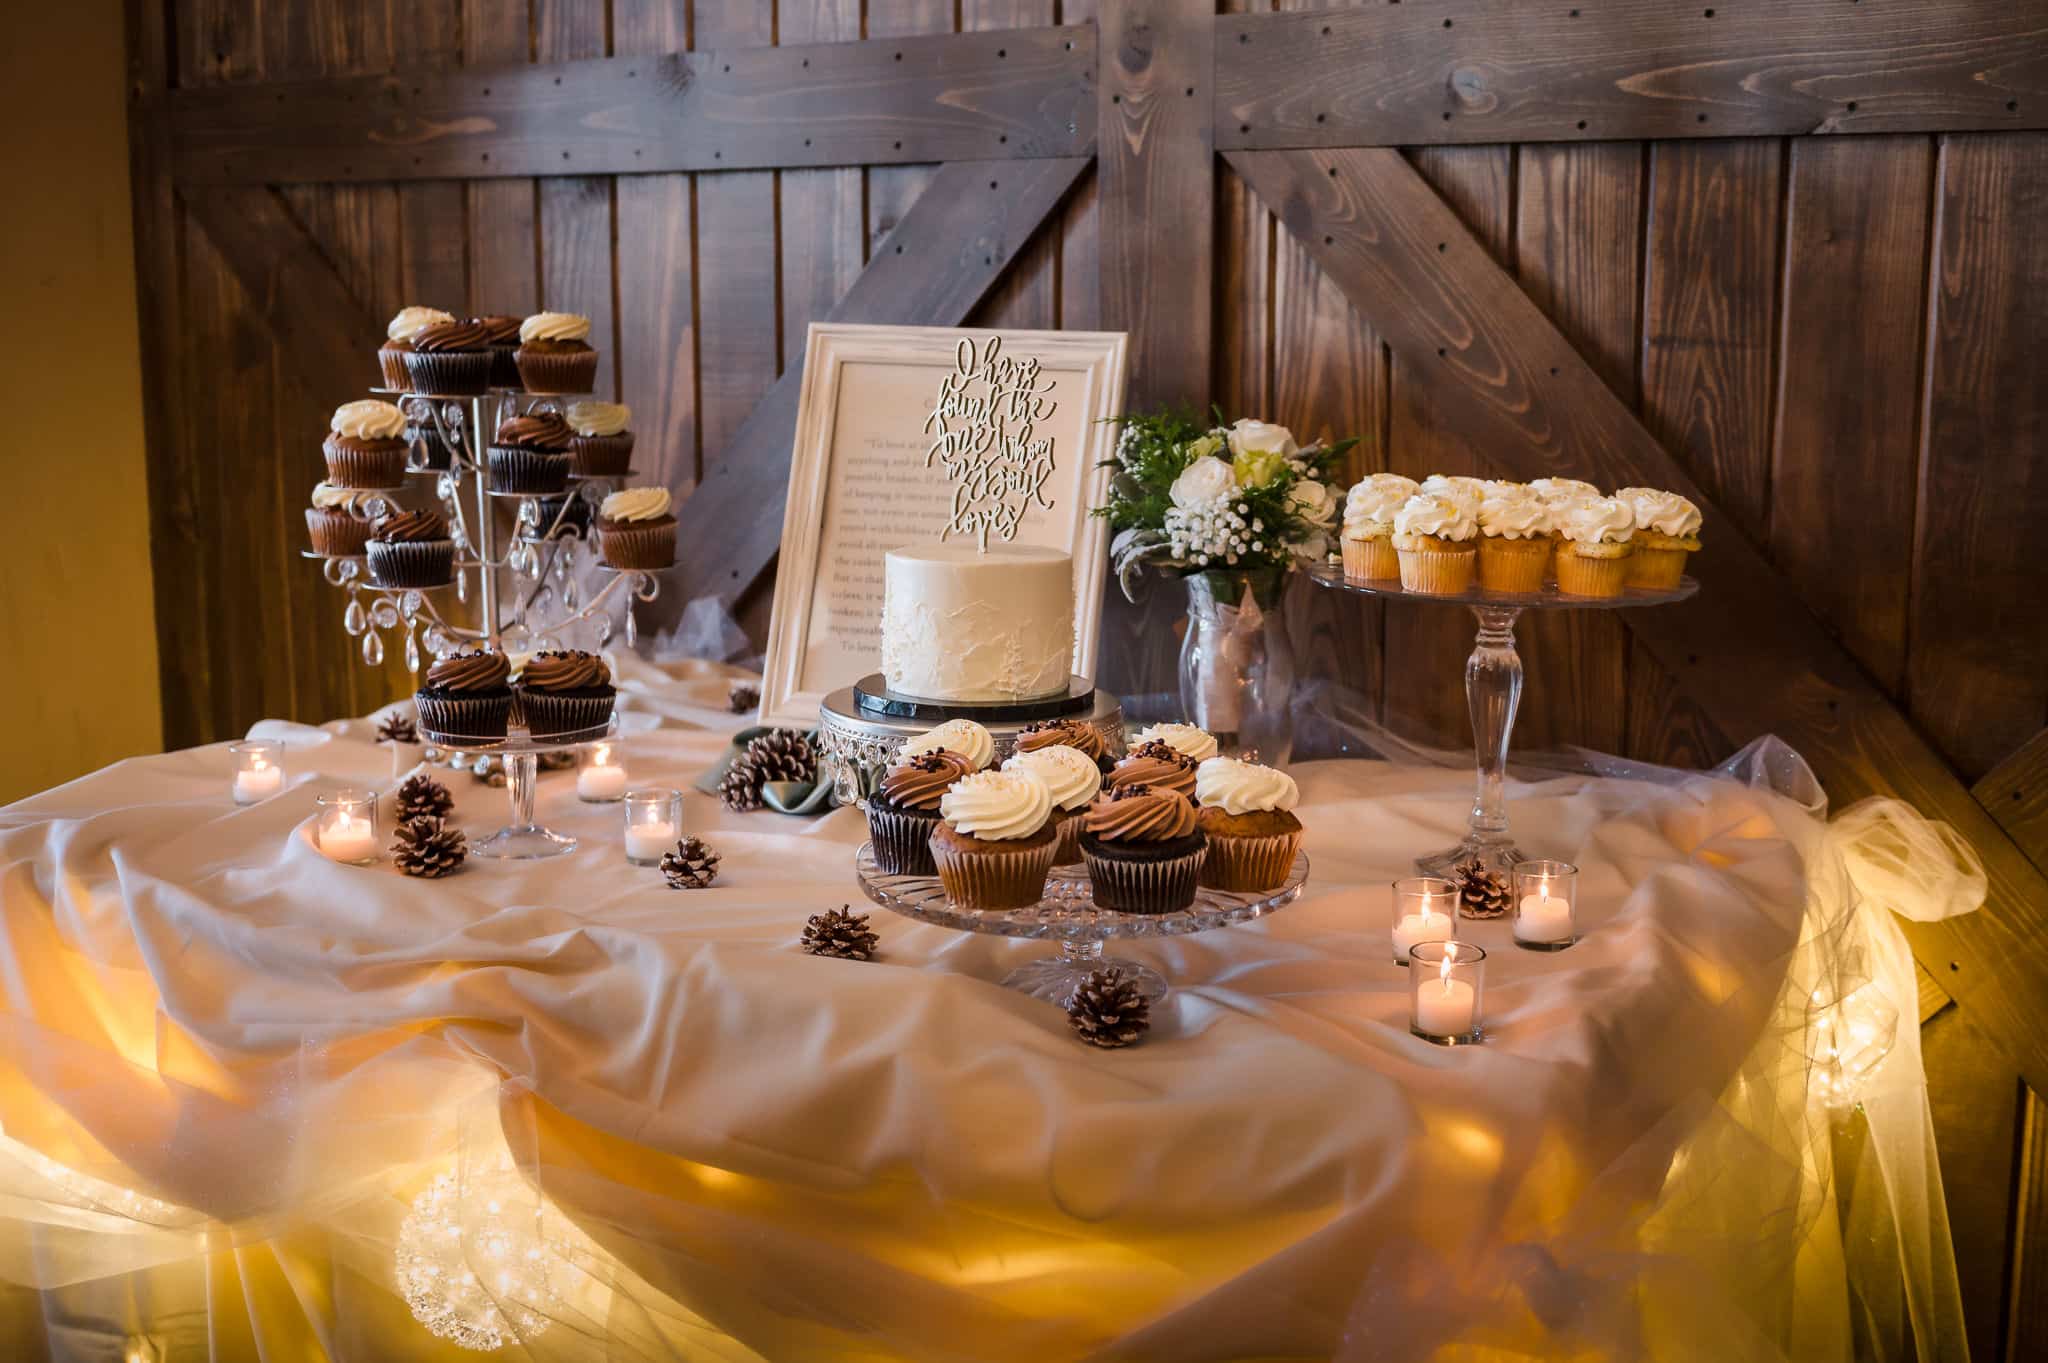 Wedding dessert table filled with crystal pedestal stands of cupcakes and a miniature white fondant wedding cake with mountain details in frostingin front of a dark brown rustic wooden paneled barn style door features warm glowing holiday lights around the edges.